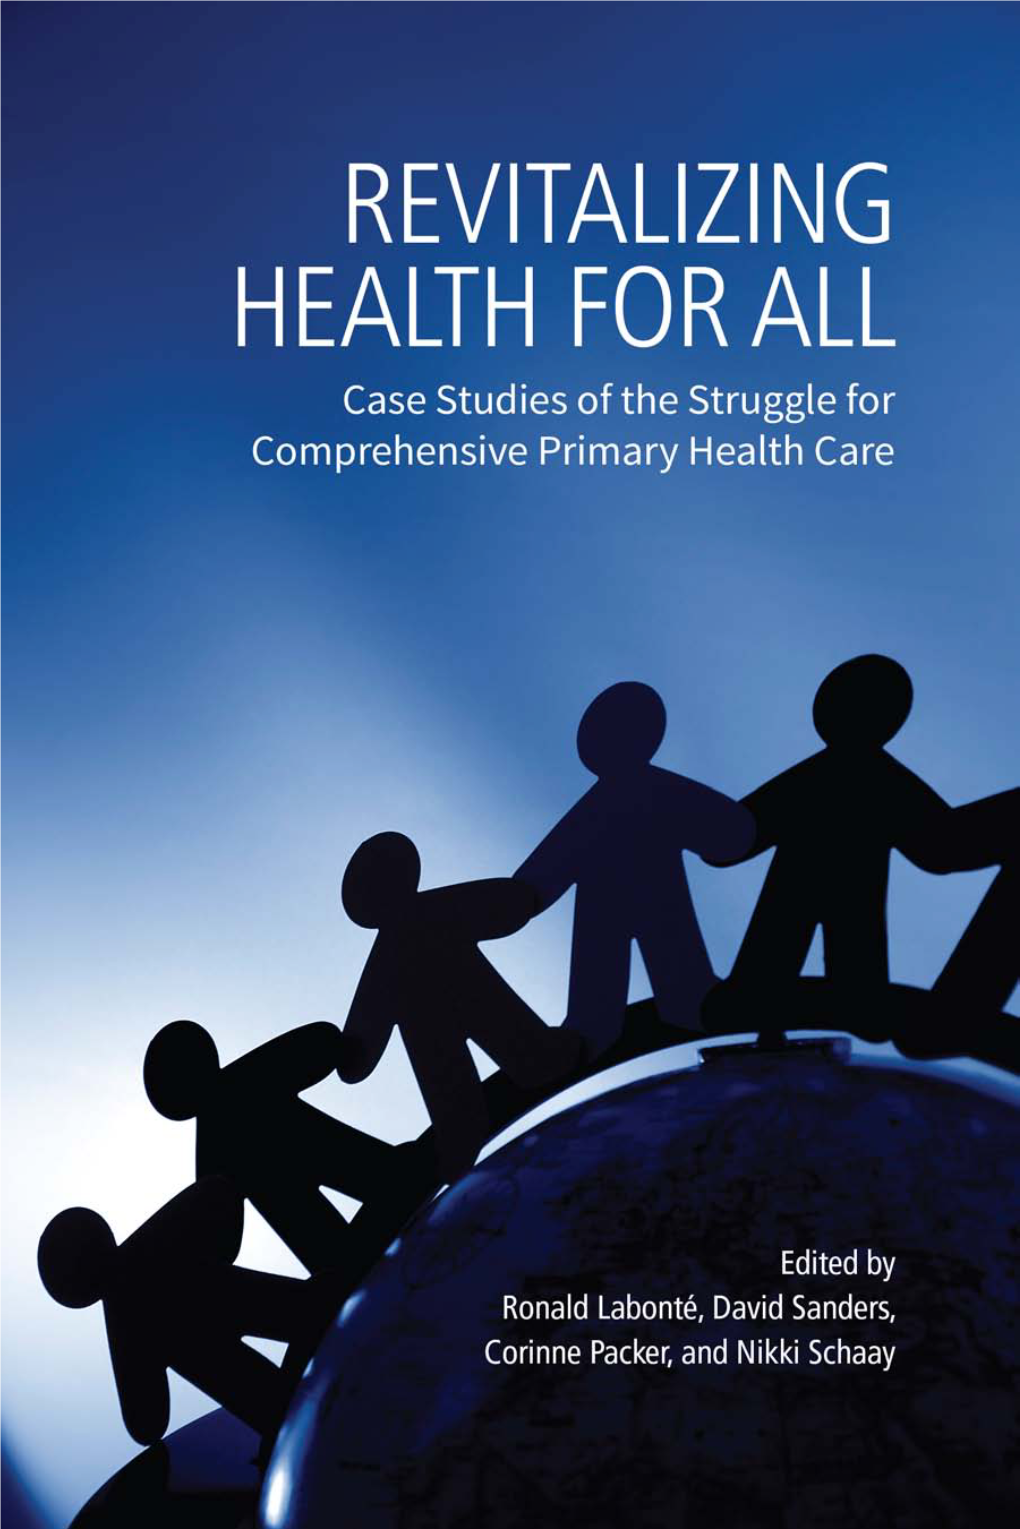 Case Studies of the Struggle for Comprehensive Primary Health Care